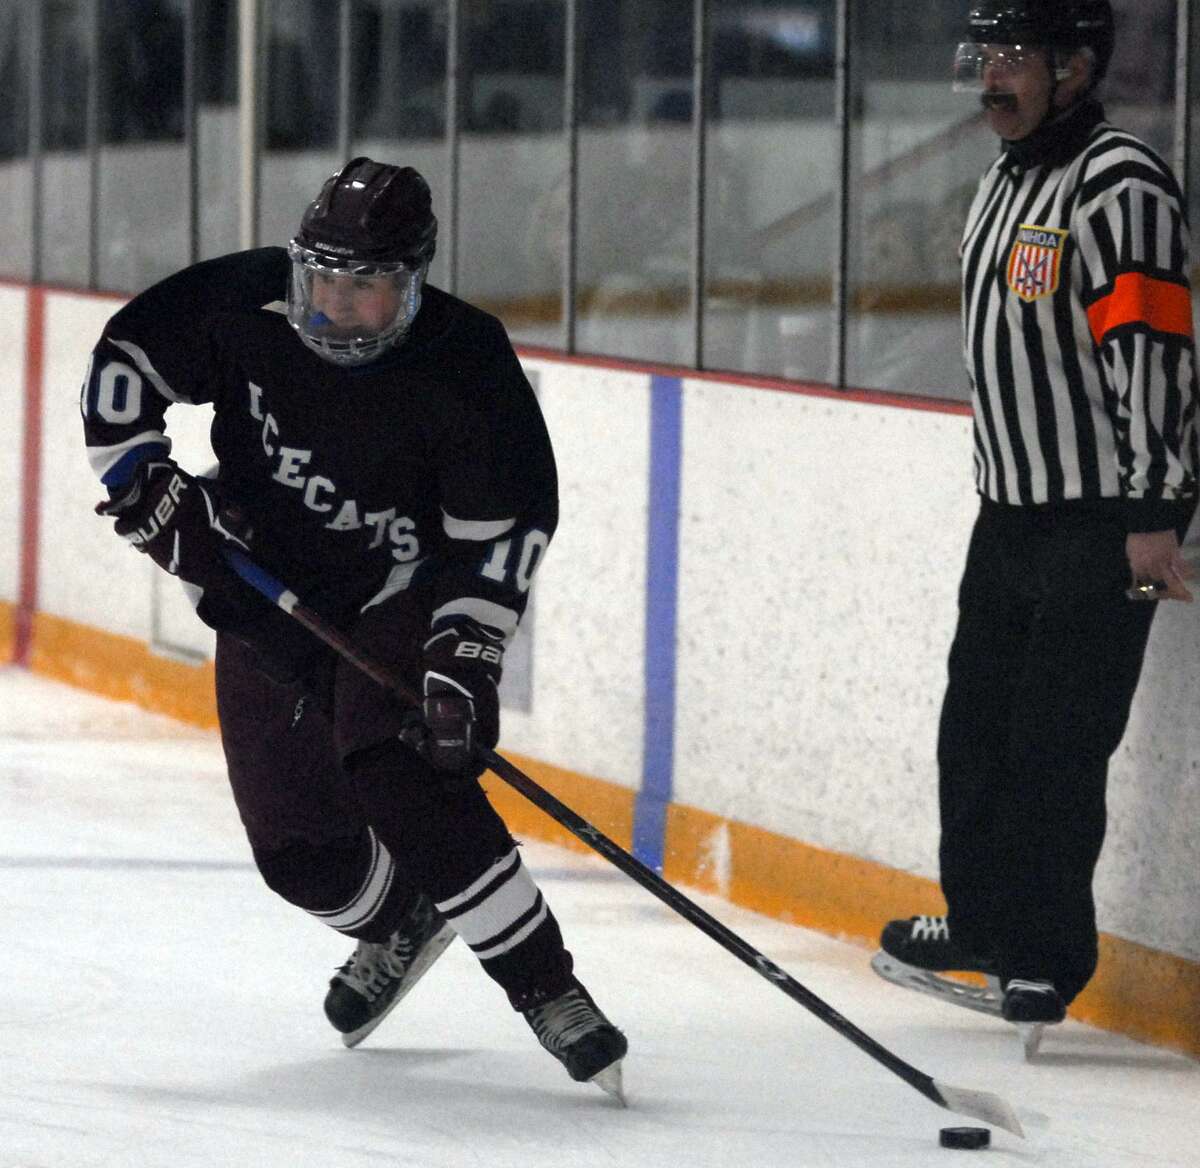 BBD’s Colin MacNevin skates with the puck during a game against Sheehan on Saturday.